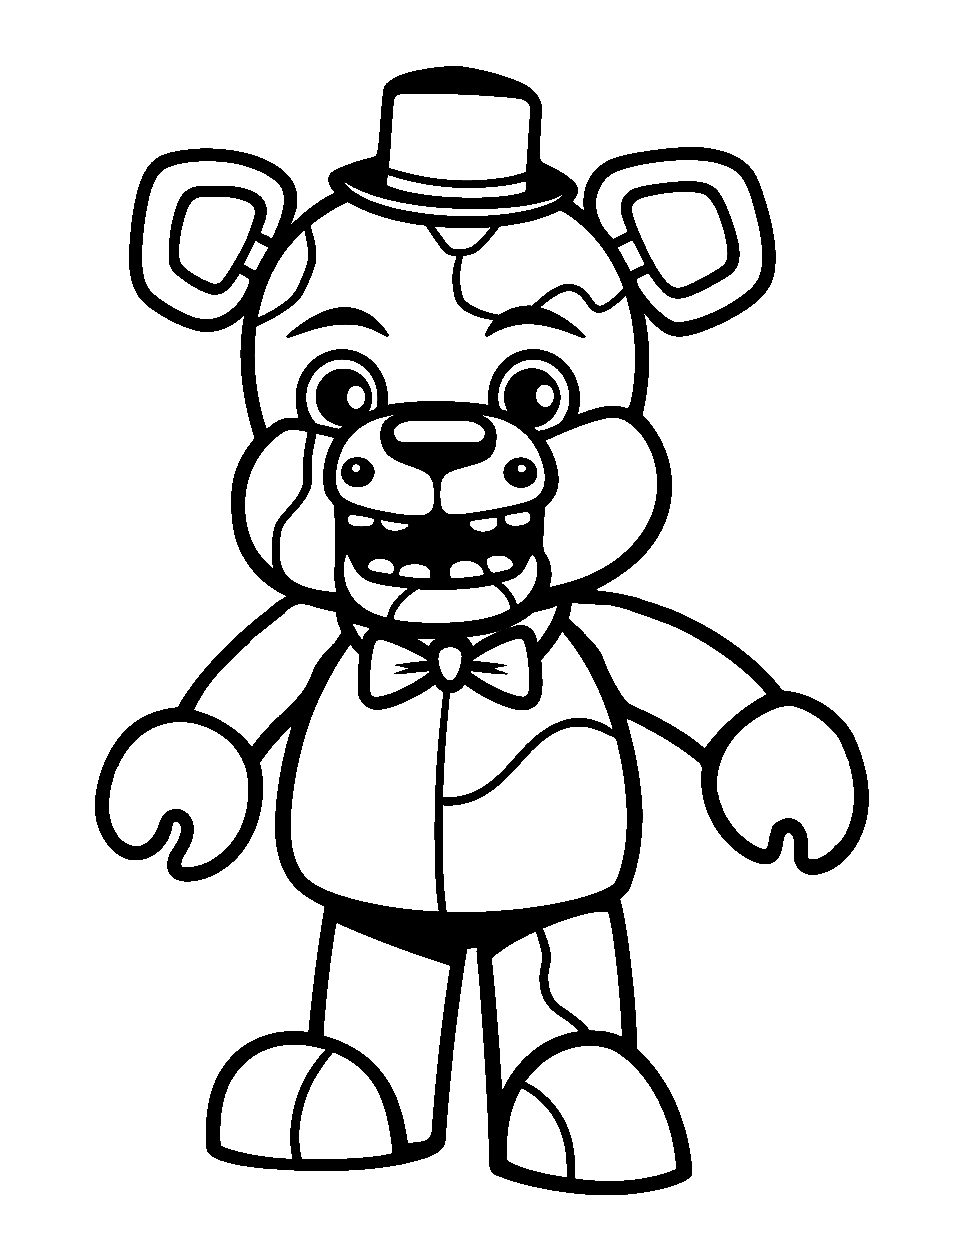 Simple Freddy Coloring Page - A simplistic drawing of Freddy with a clear background.